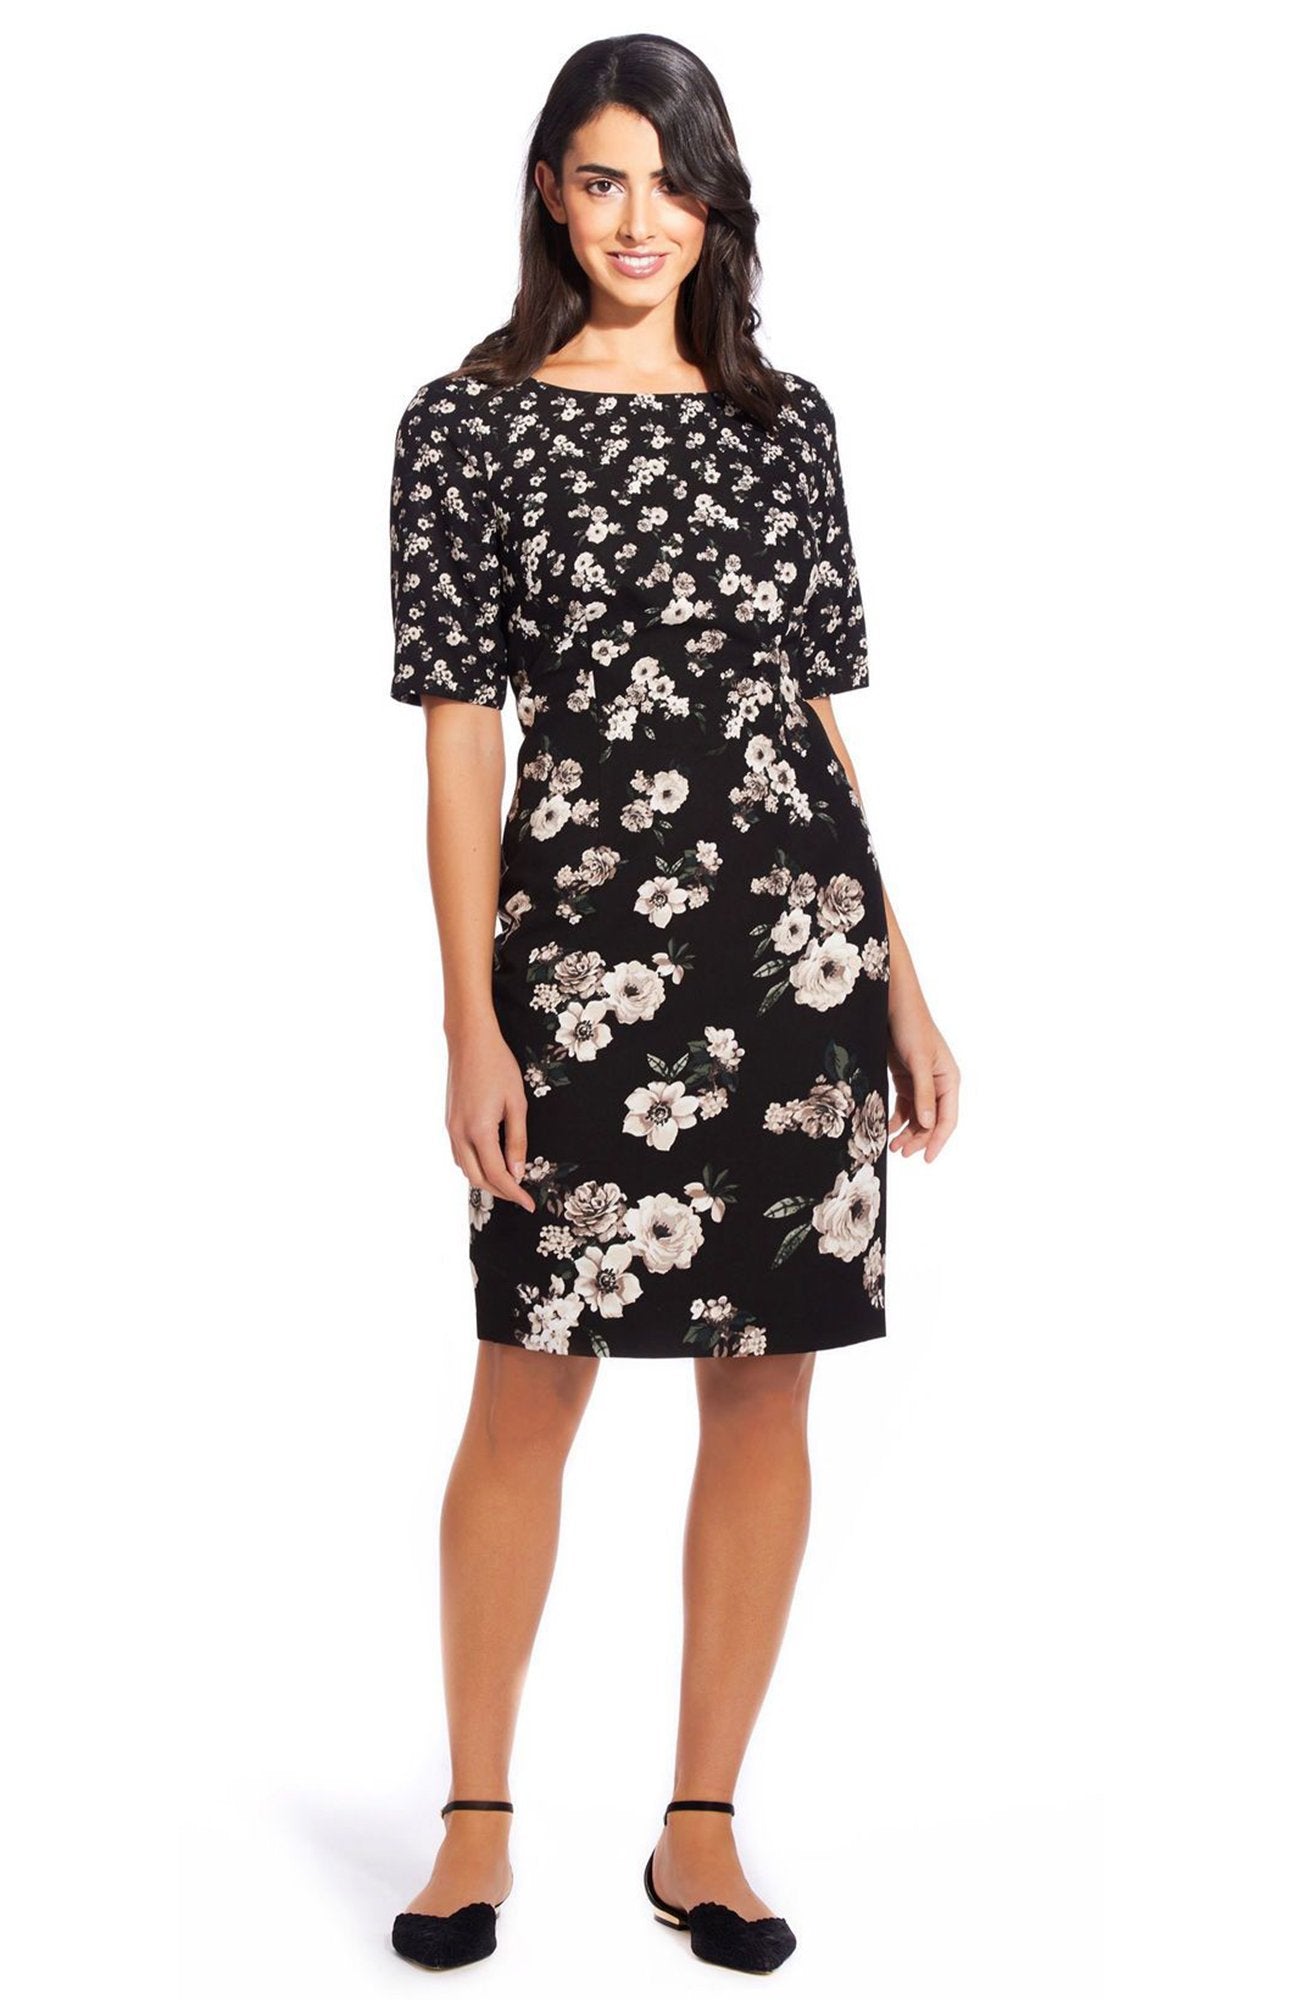 Adrianna Papell - AP1D103163 Floral Print Bateau Sheath Dress In Black and Multi-Color